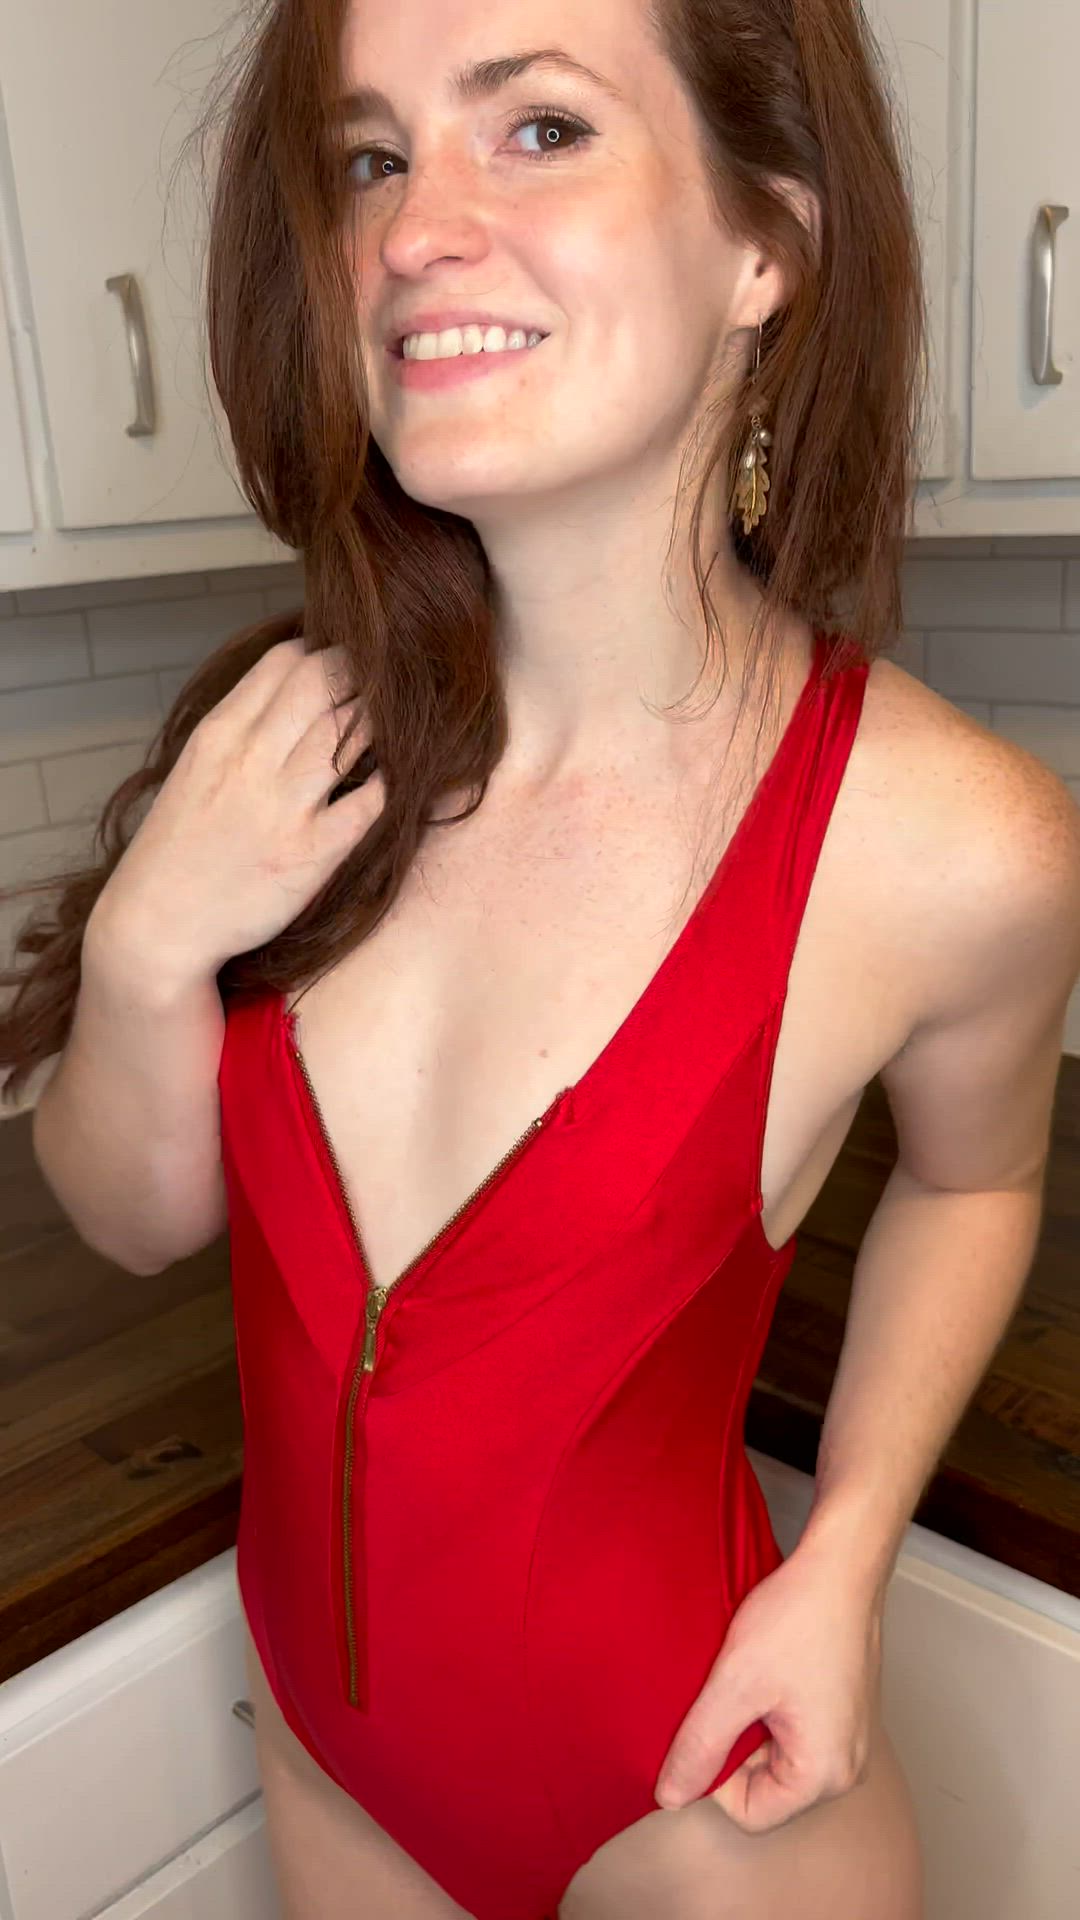 Redhead porn video with onlyfans model saltysweetcaroline <strong>@saltysweetcaroline</strong>